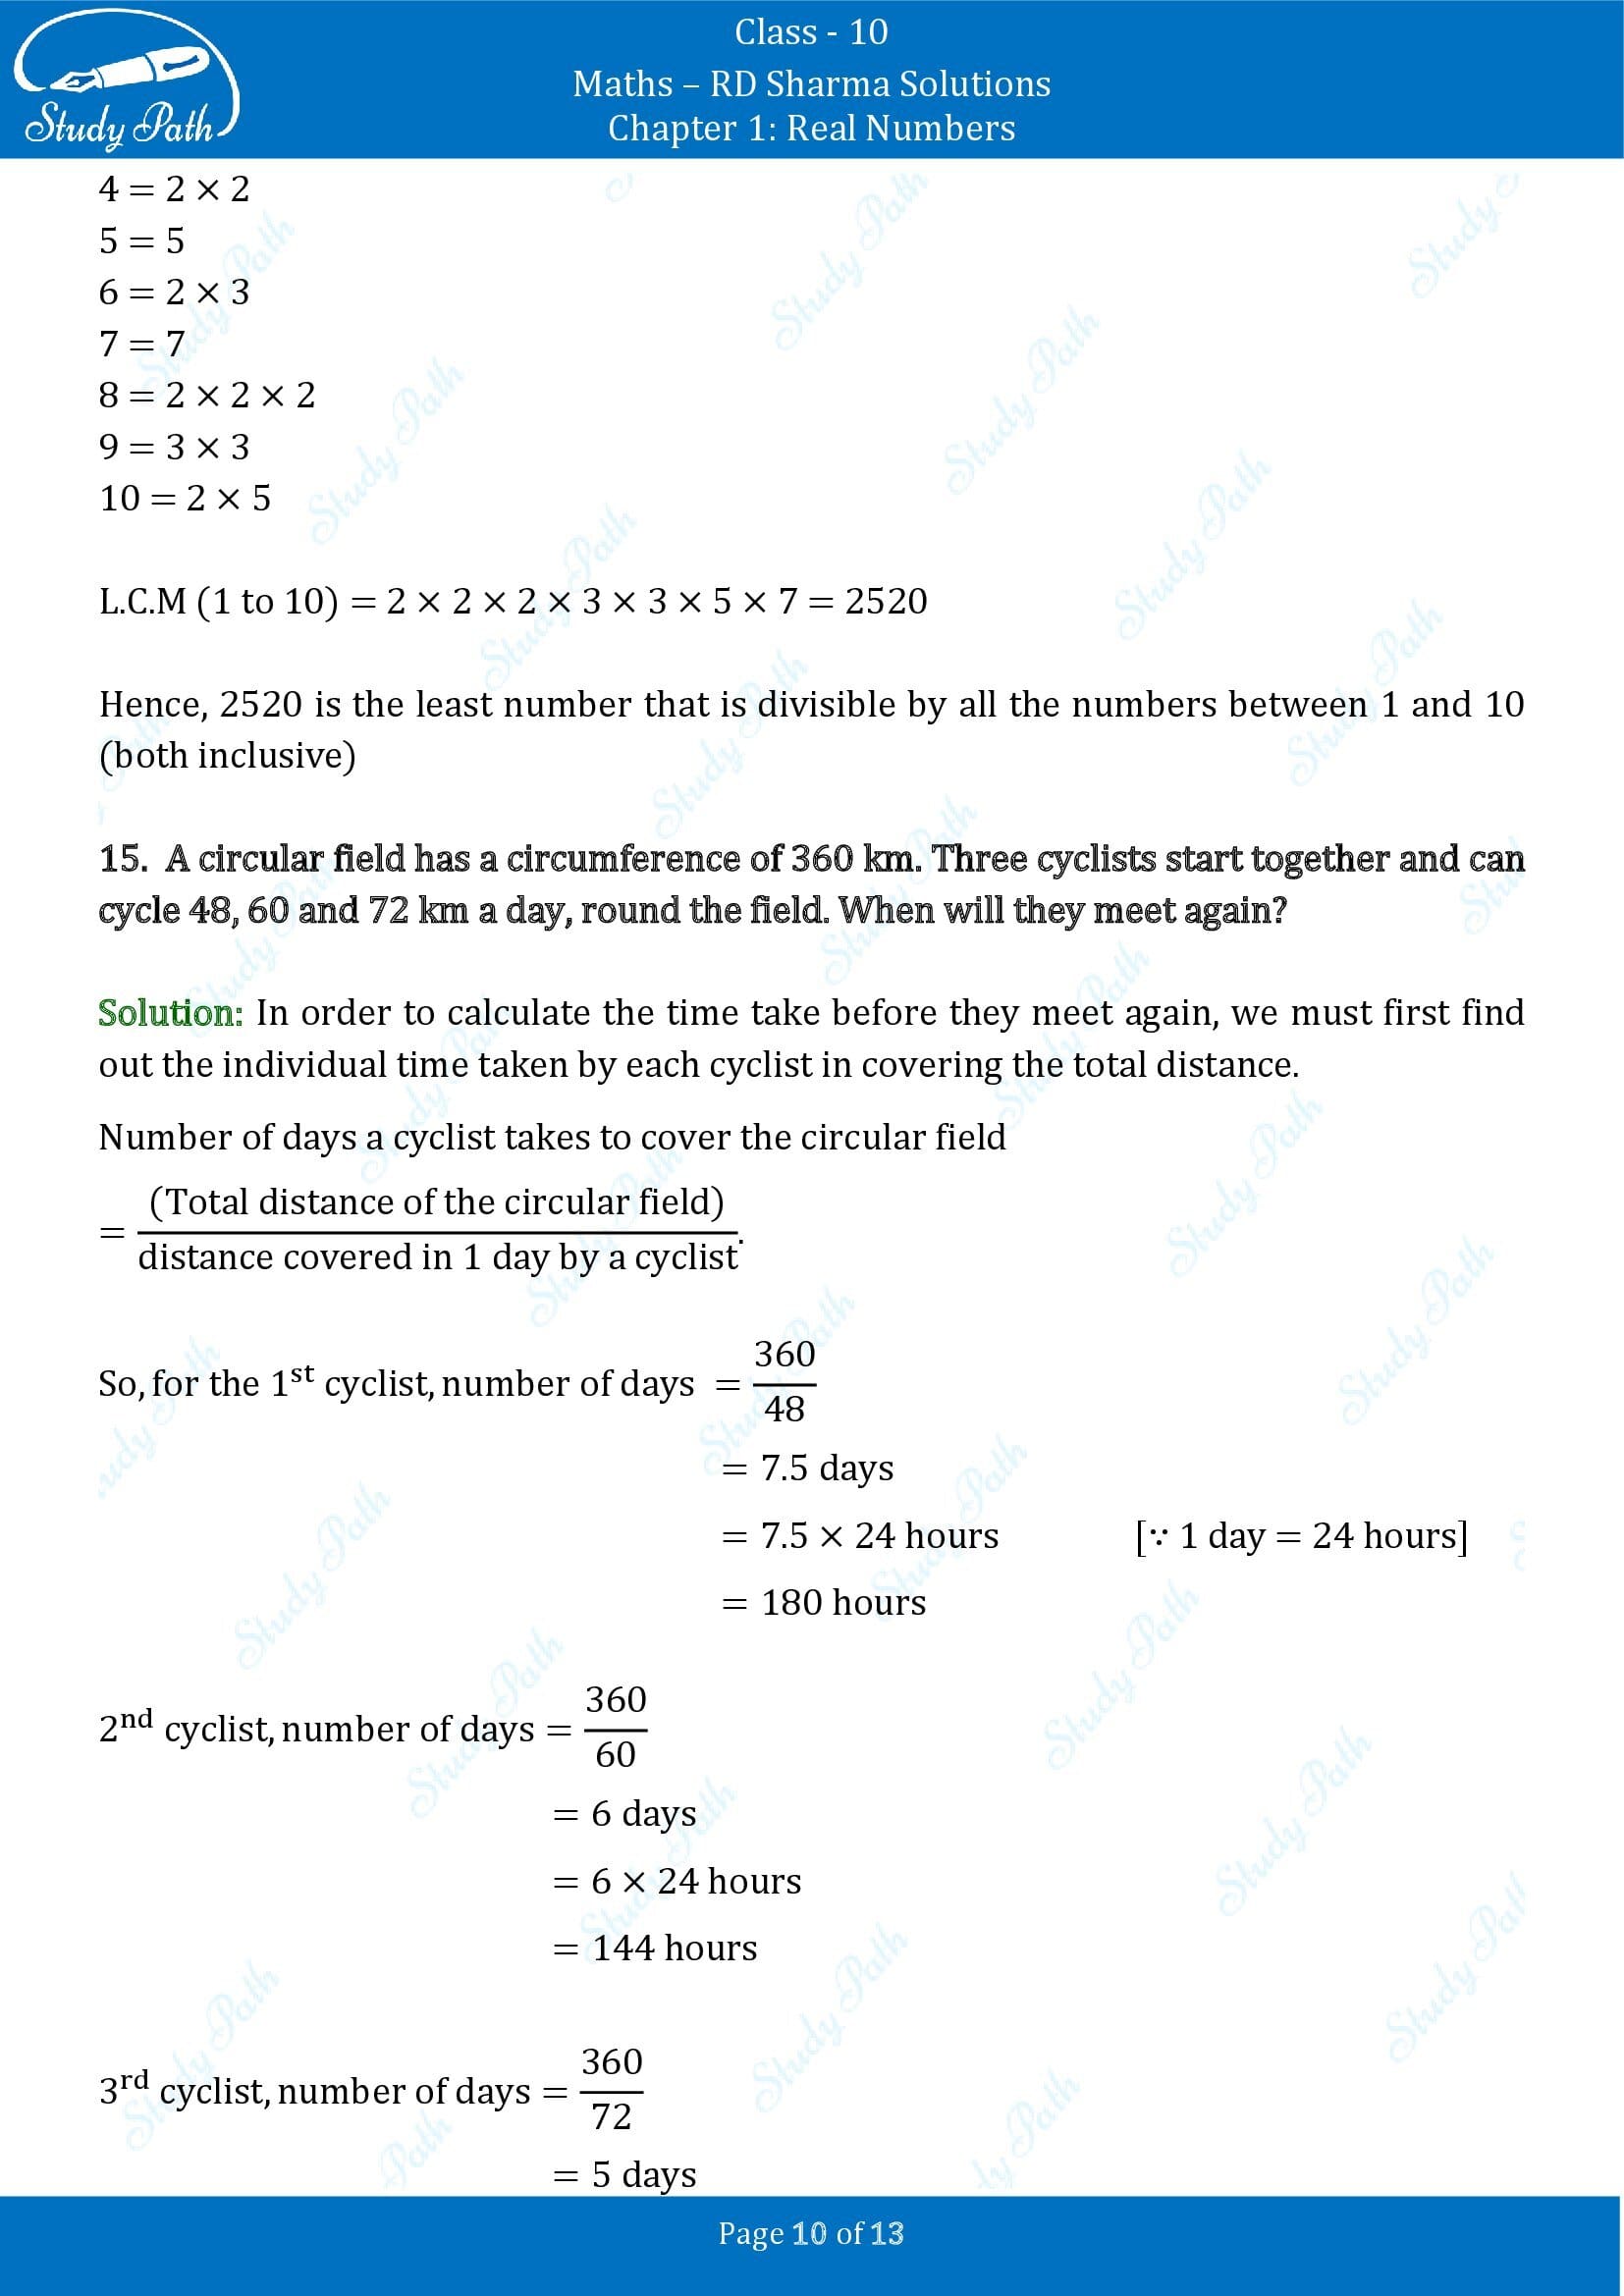 RD Sharma Solutions Class 10 Chapter 1 Real Numbers Exercise 1.4 00010